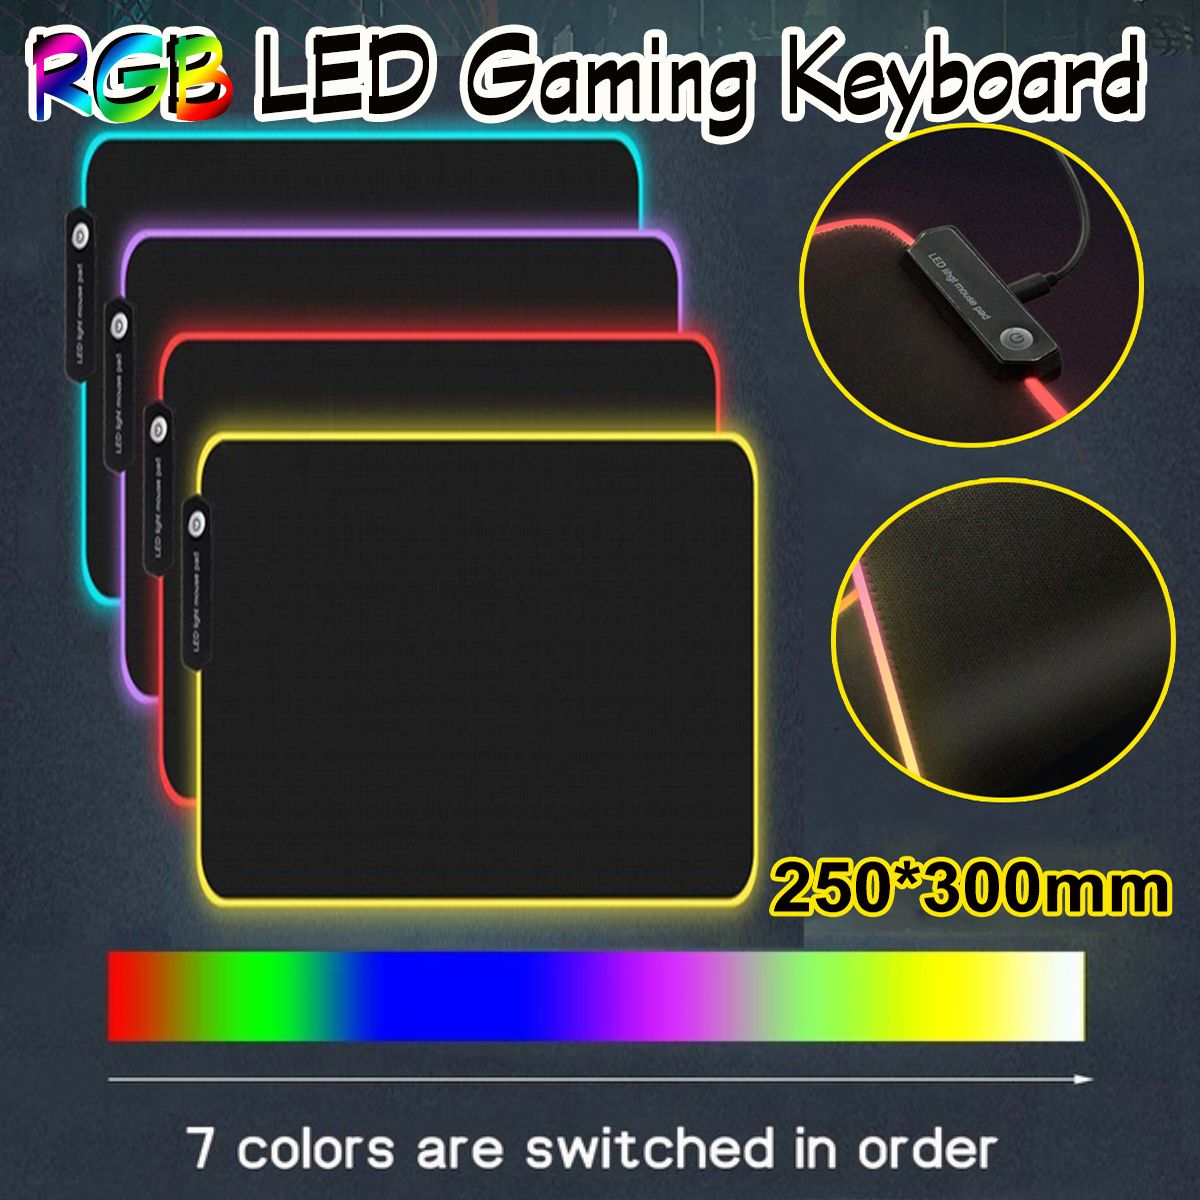 250x300mm-USB-Wired-RGB-LED-Gaming-Keyboard-for-Gaming-Office-PC-Laptop-1680471